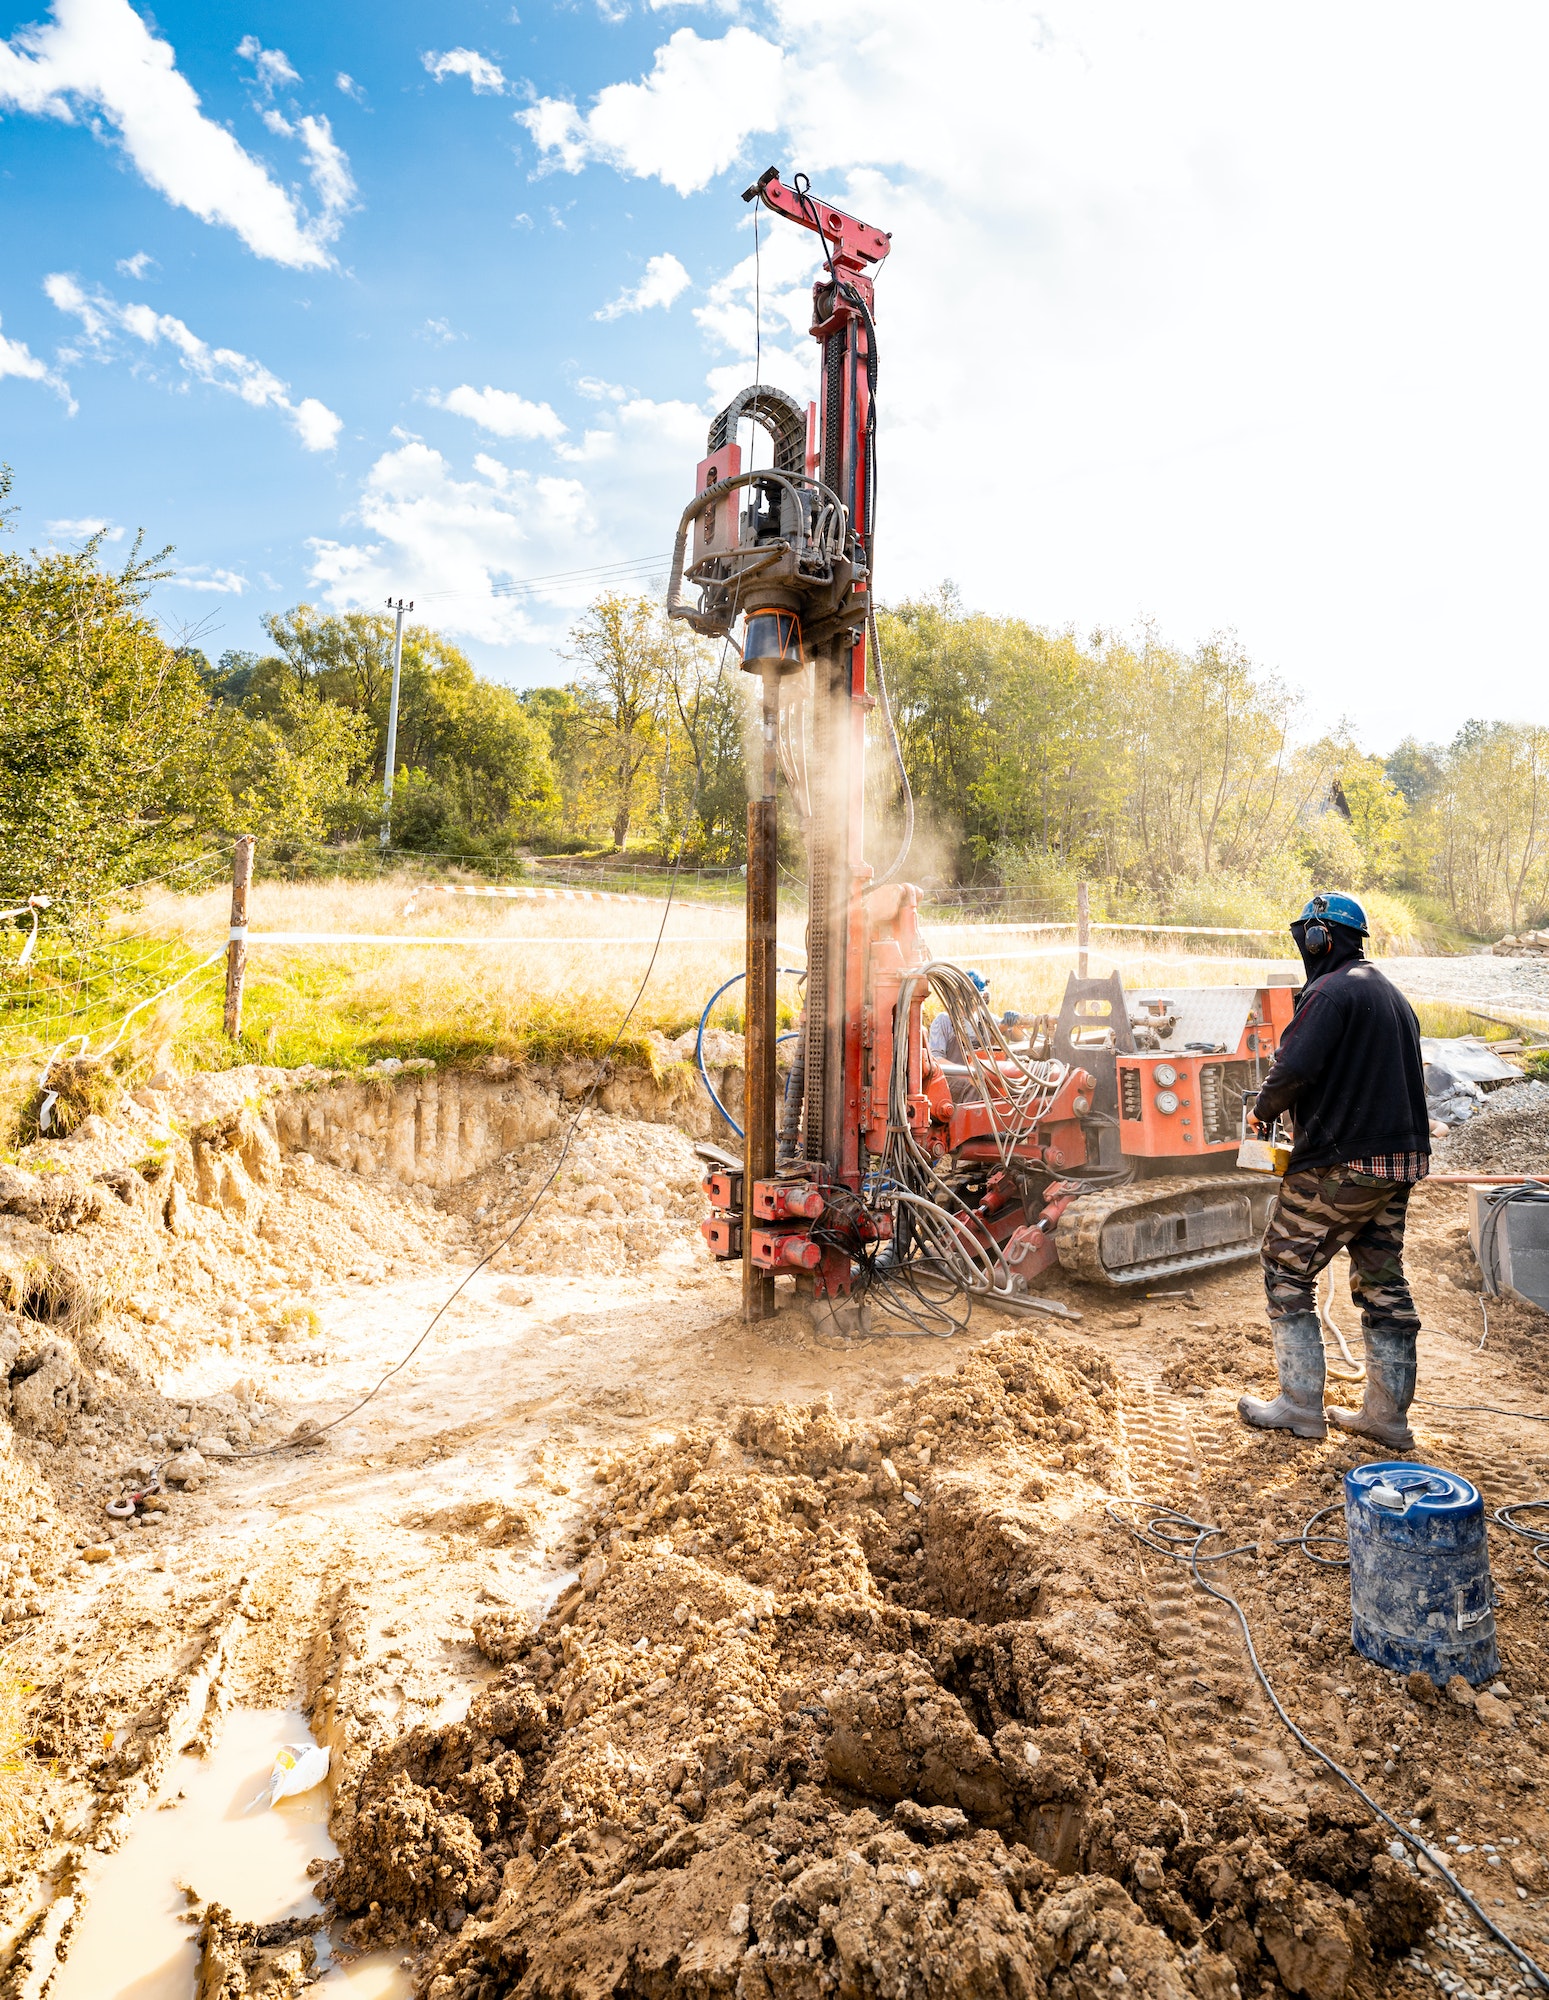 Drilling wells in the ground using a professional drill and machine